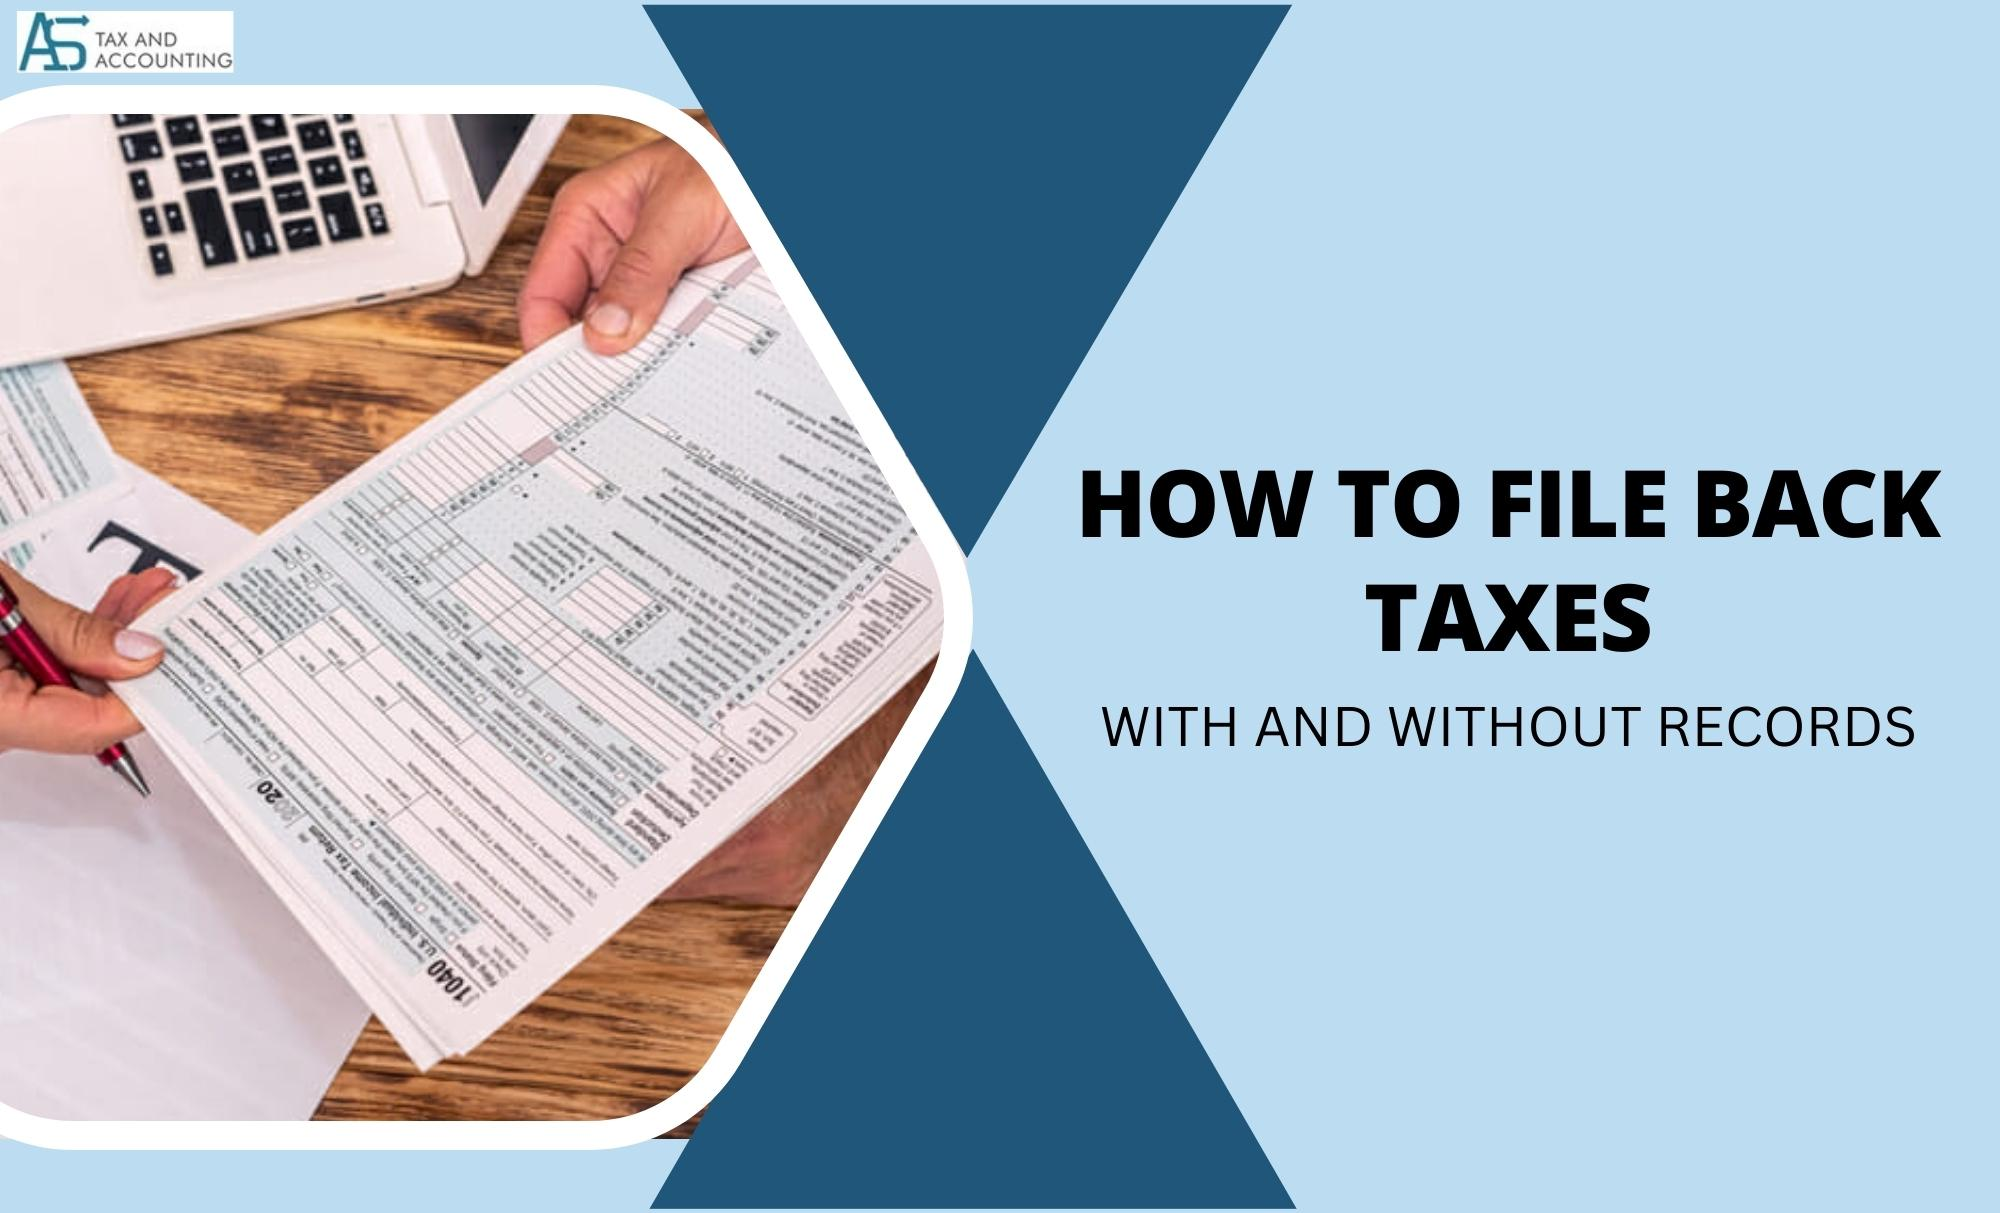 How to file back taxes